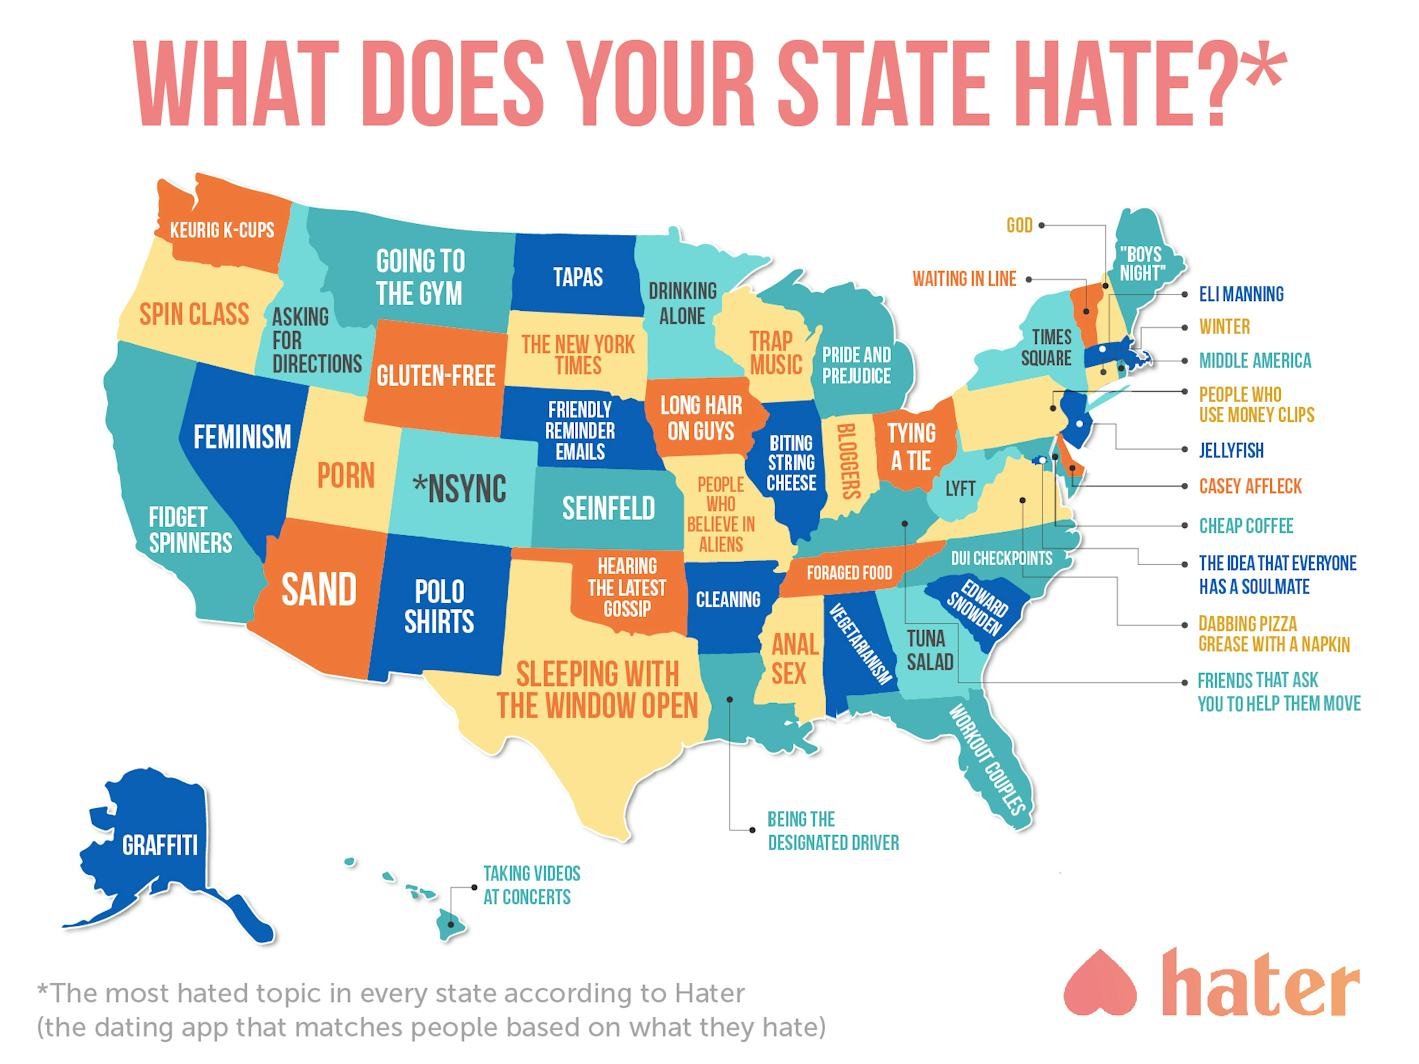 This Map Uses Data to Show What Each State 'Hates' The Most